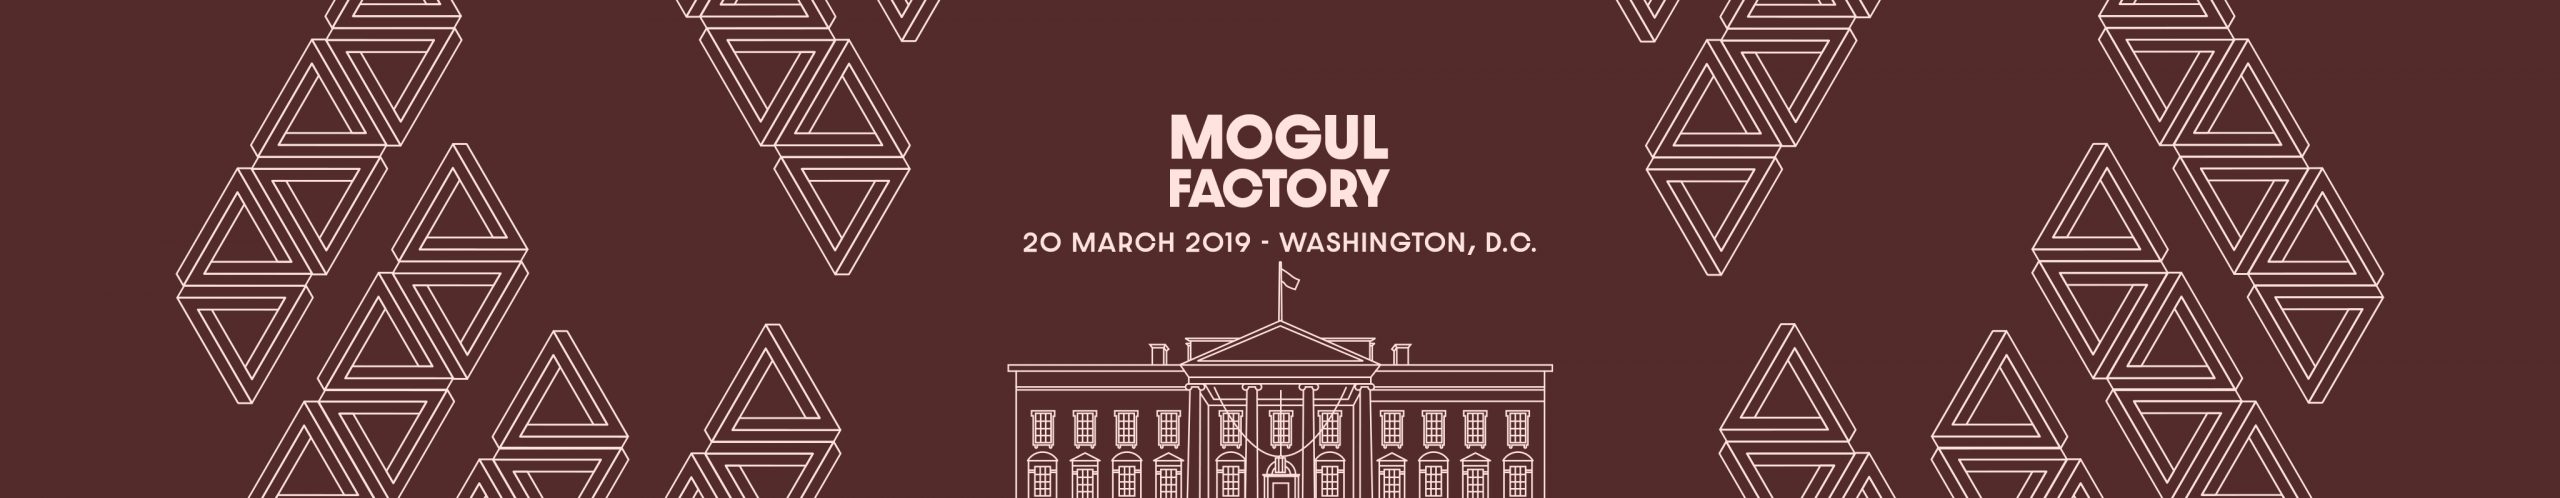 Mogul Factory Home Updated scaled